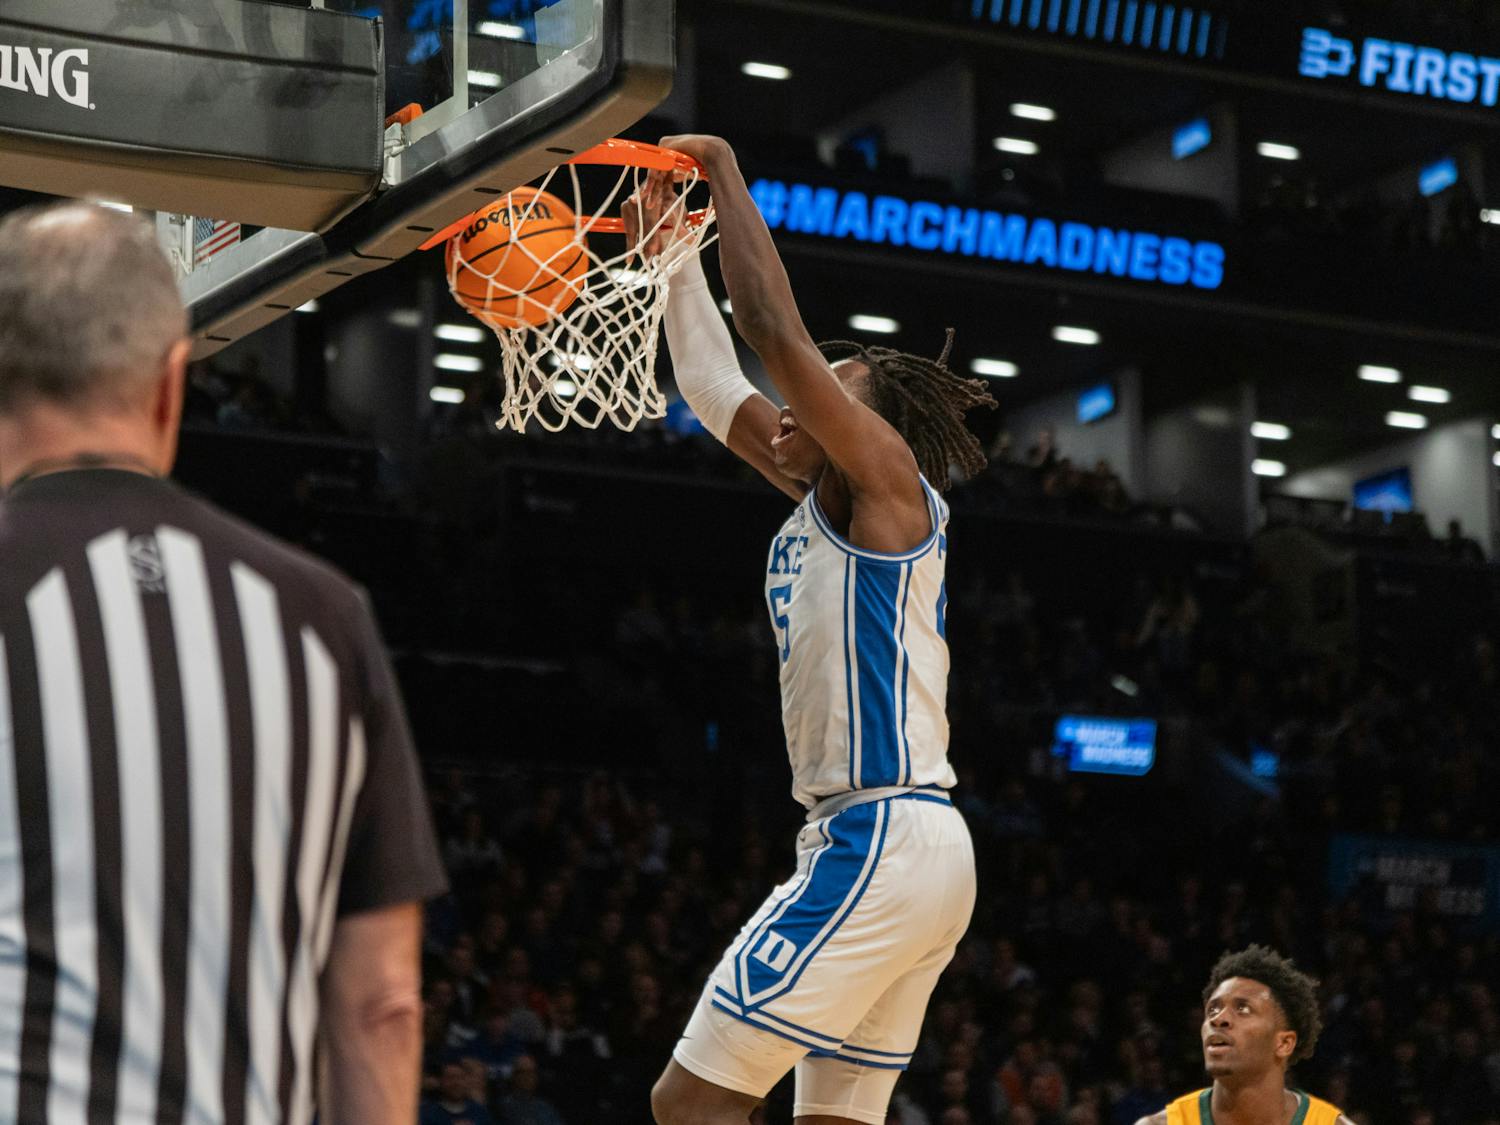 Mark Mitchell slams the ball home during the first half of Duke's matchup with Vermont.